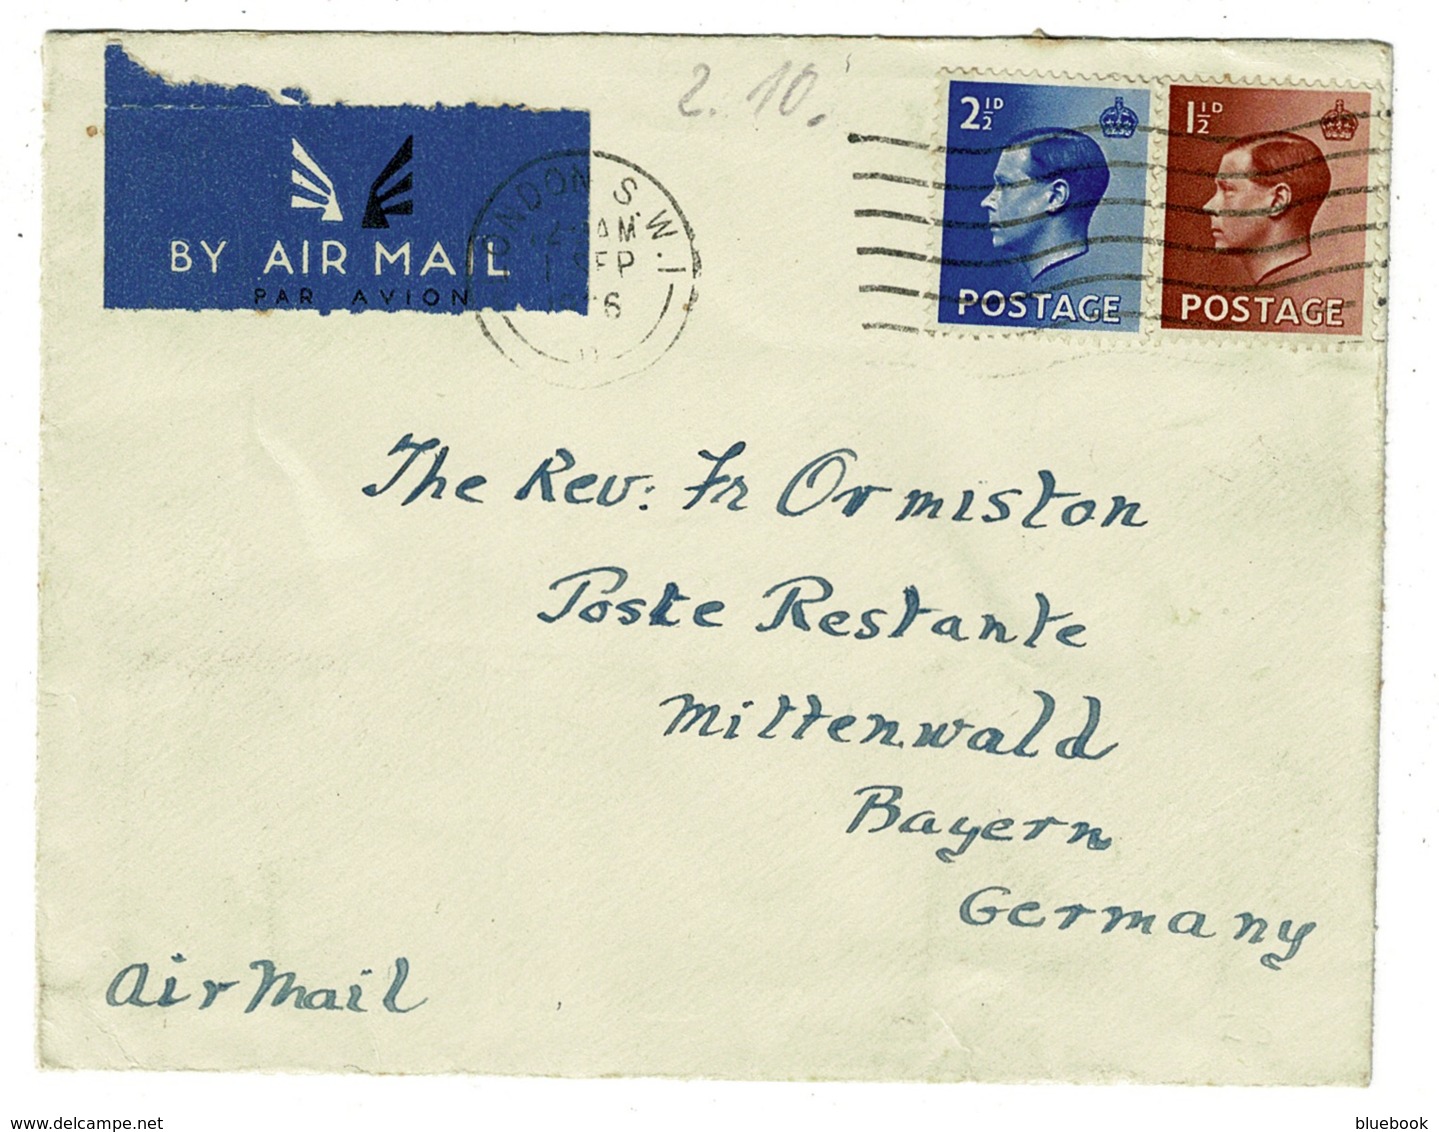 Ref 1355 - GB 1936 KEVIII FDC - First Day Cover - 4d Airmail Rate Cover To Germany - Covers & Documents